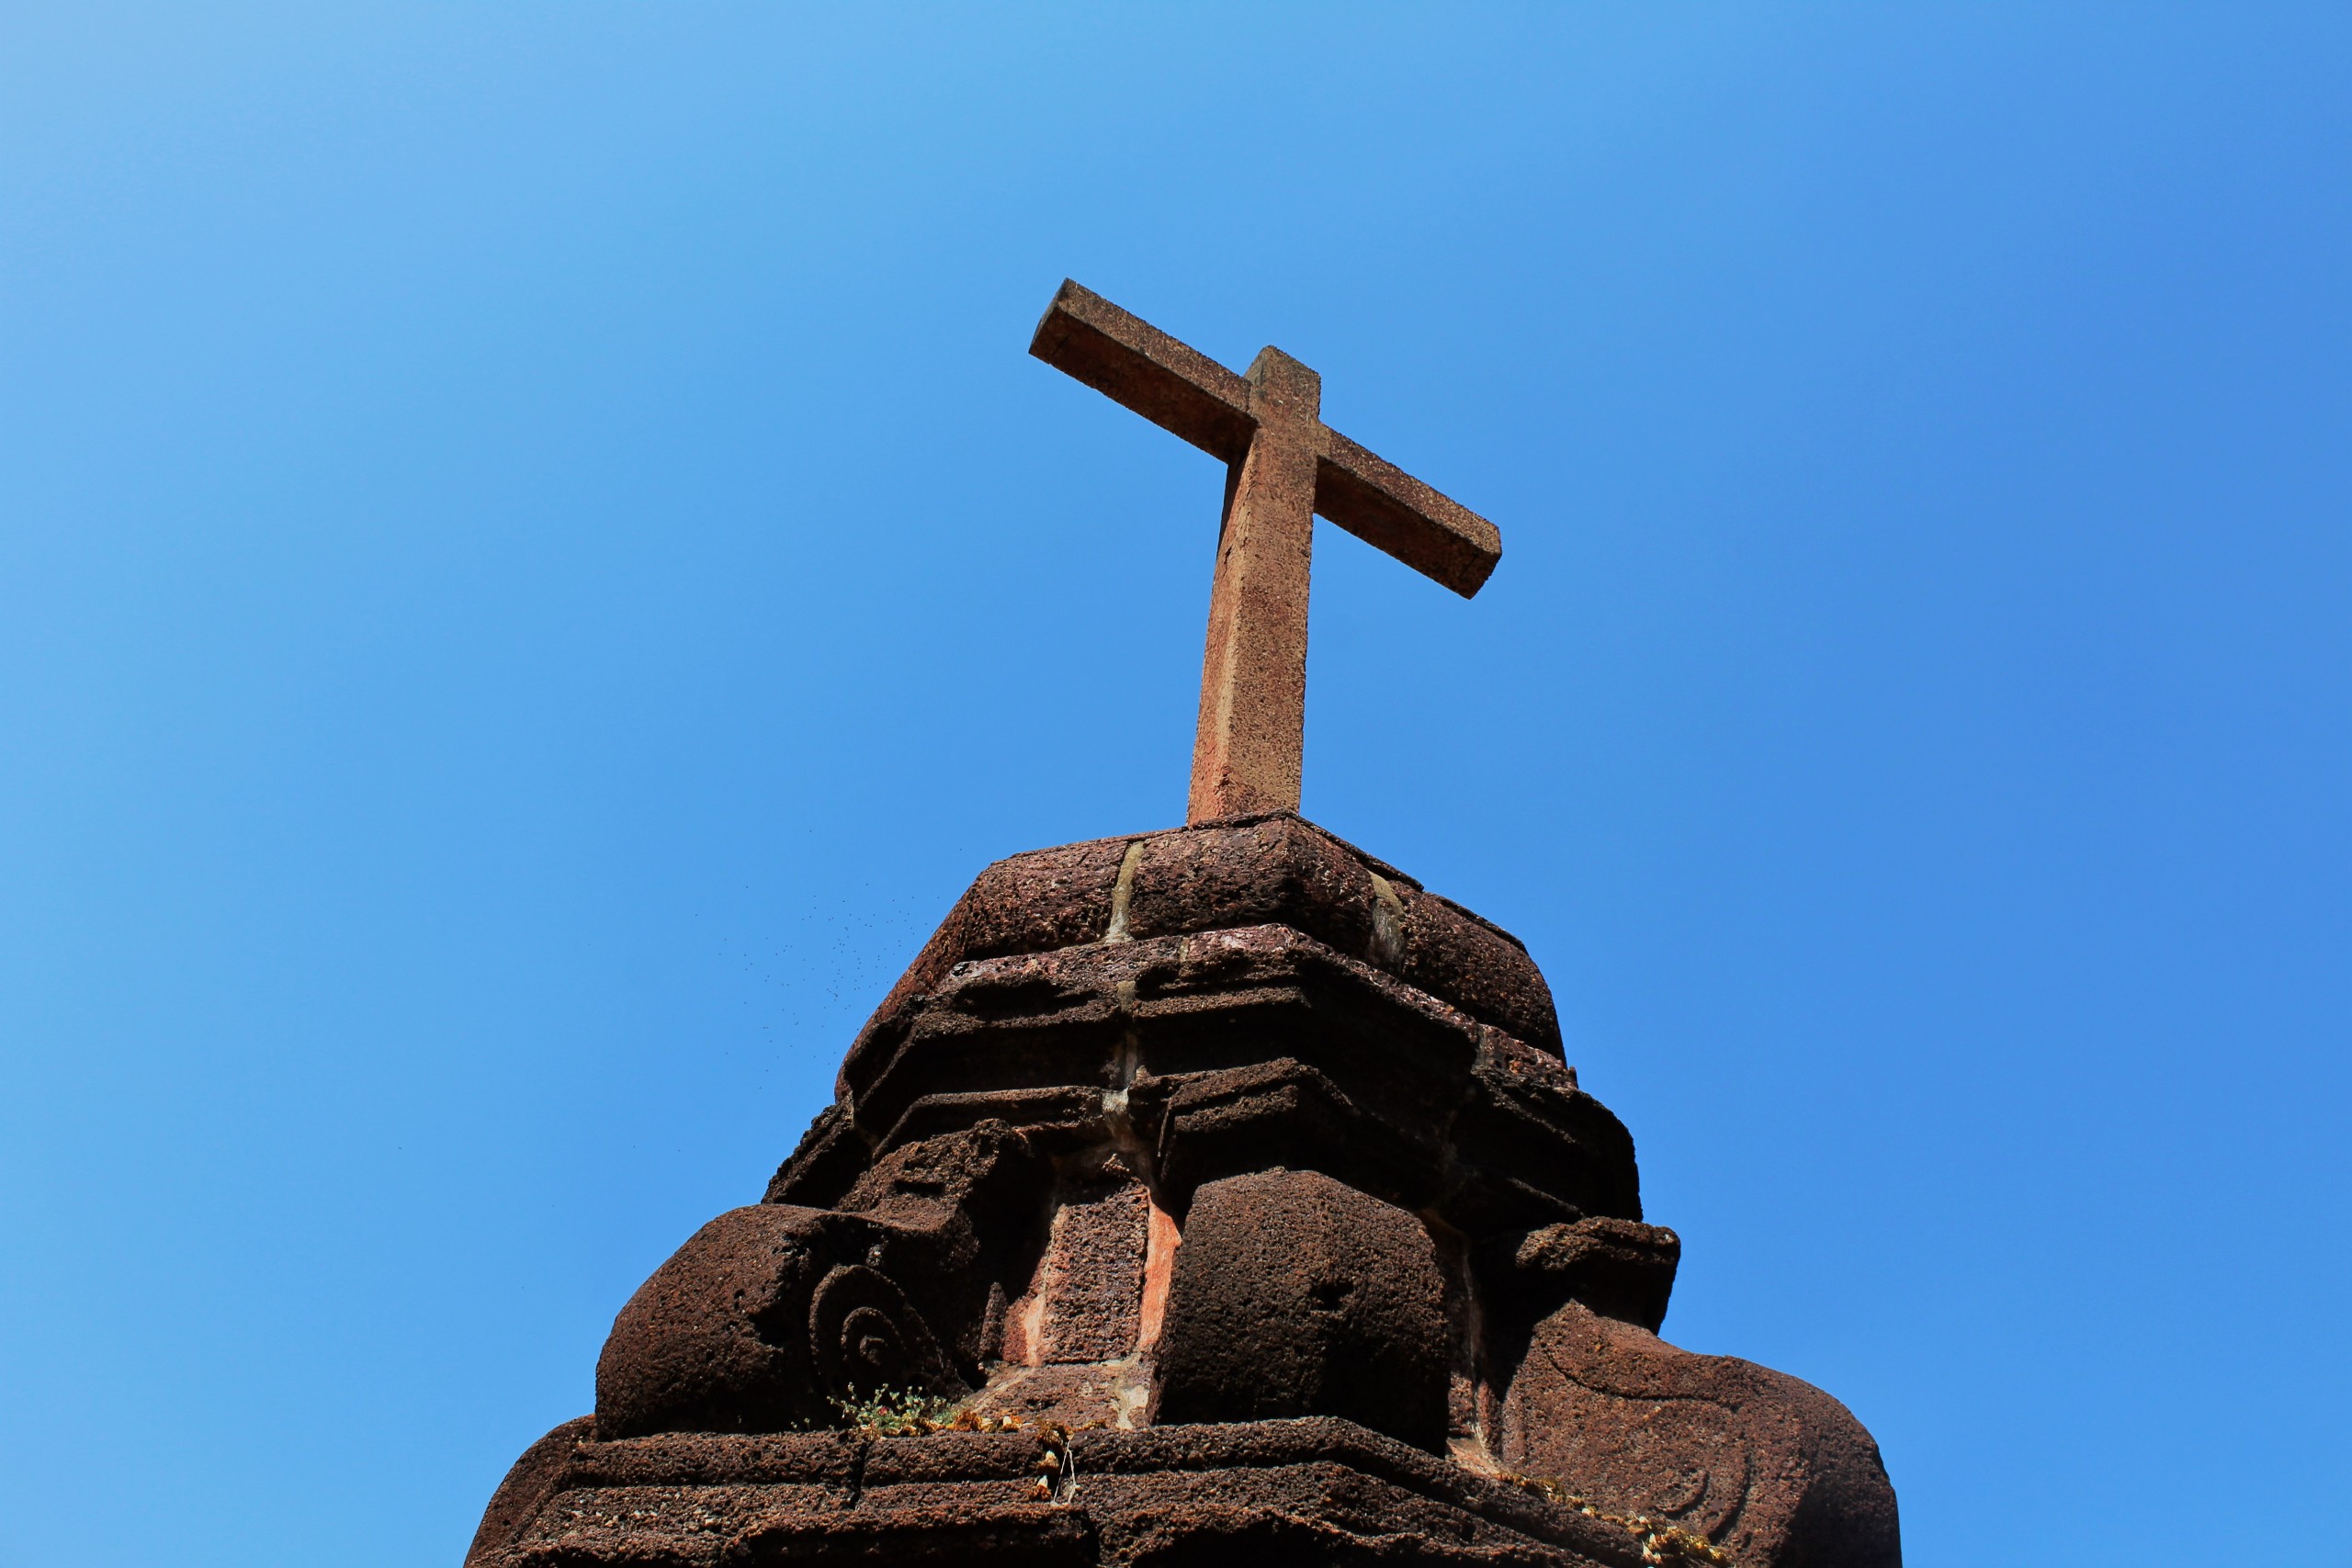 The Cross stands